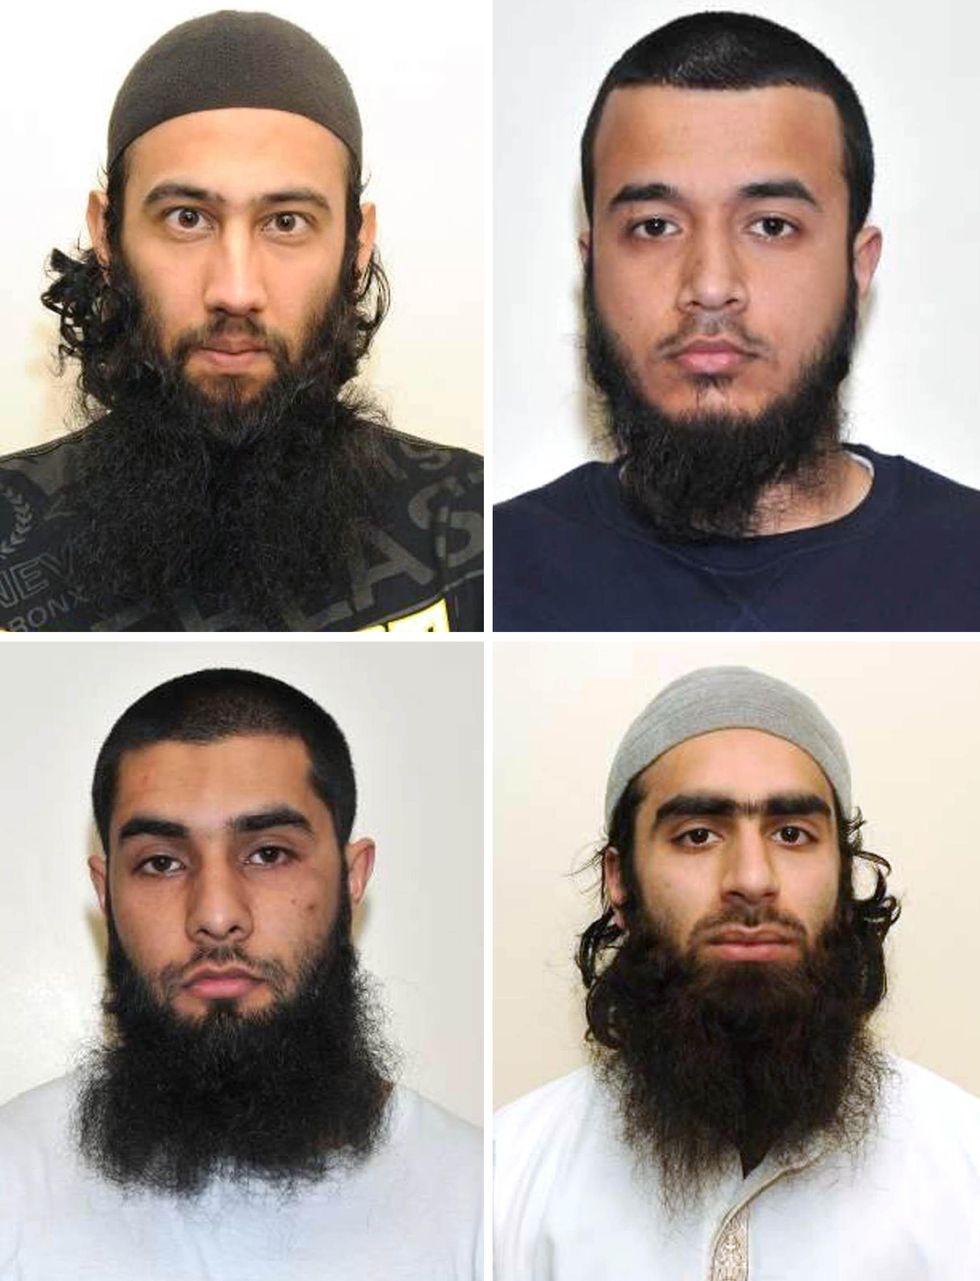 Jihadi gang members who plotted to blow up army base freed from prison